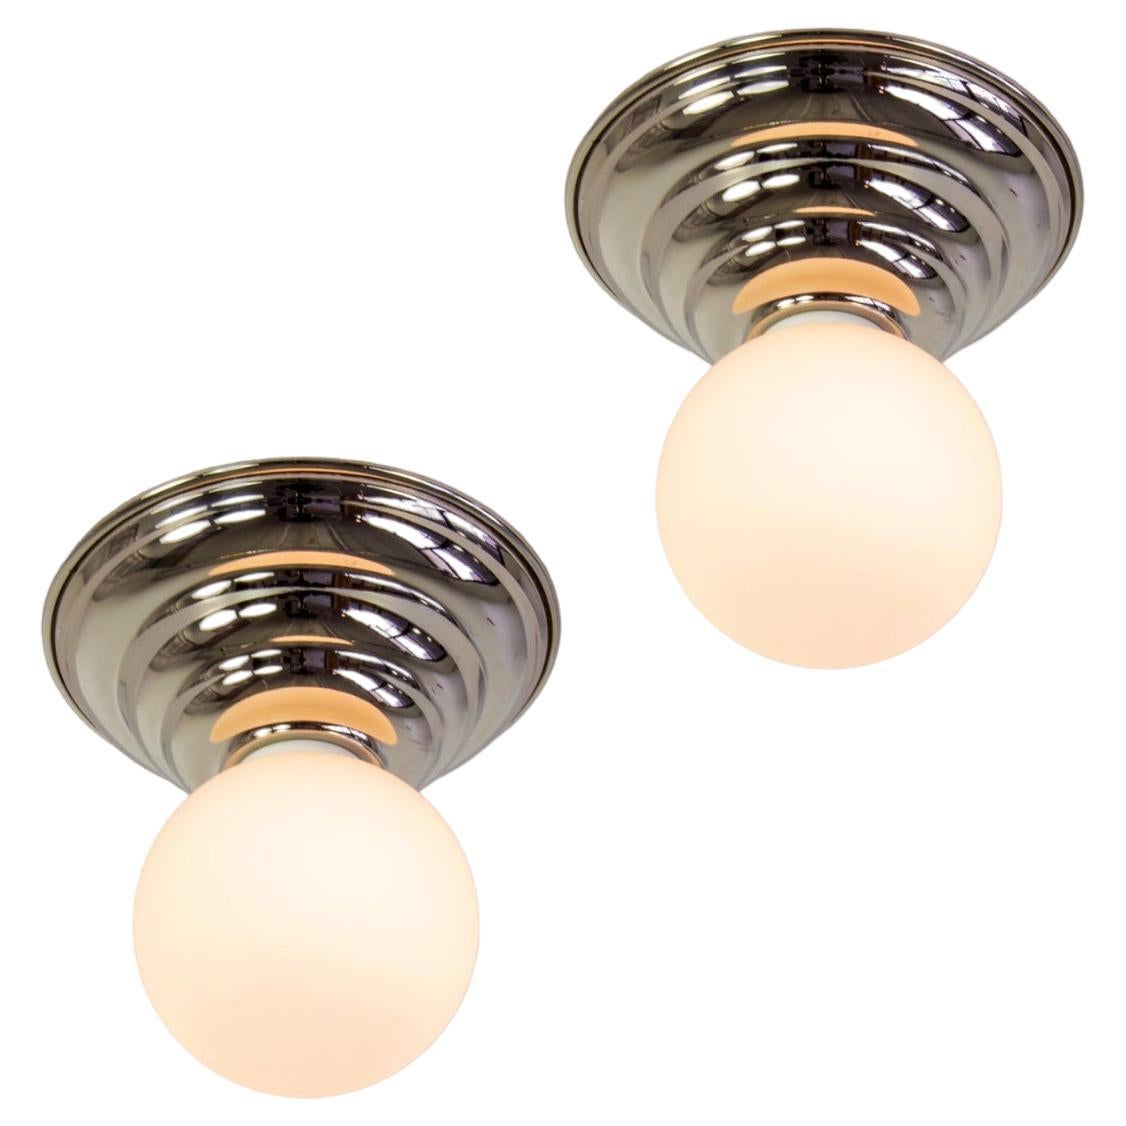 Pair of Hive Flush Mounts by Research.Lighting, Polished Nickel, In Stock